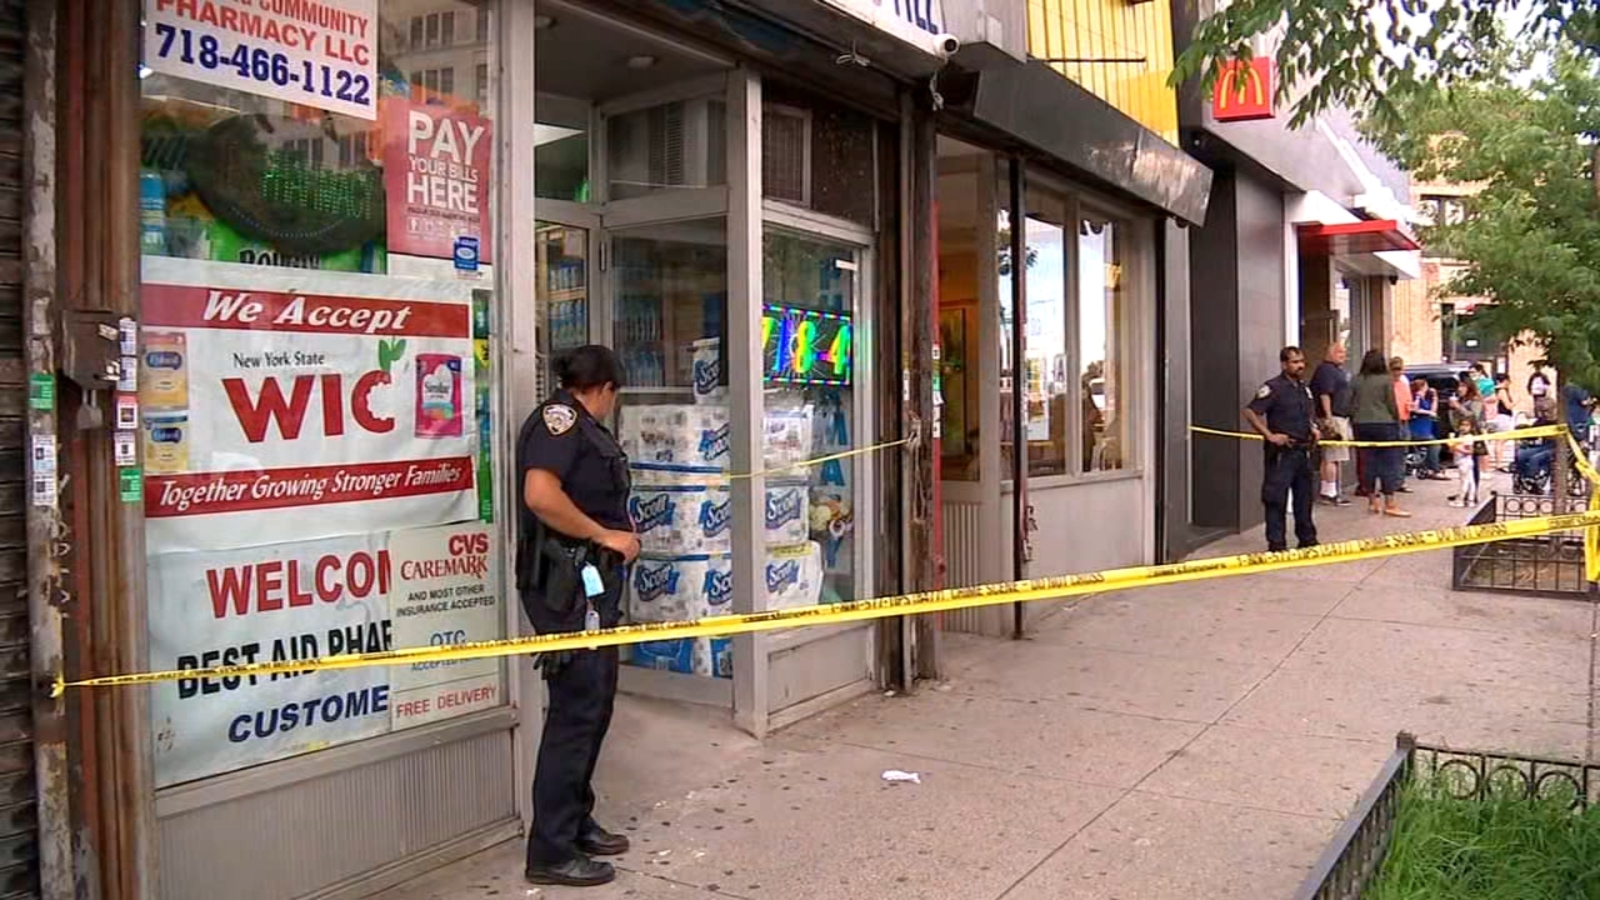 Man shot and killed after being followed into Bronx pharmacy